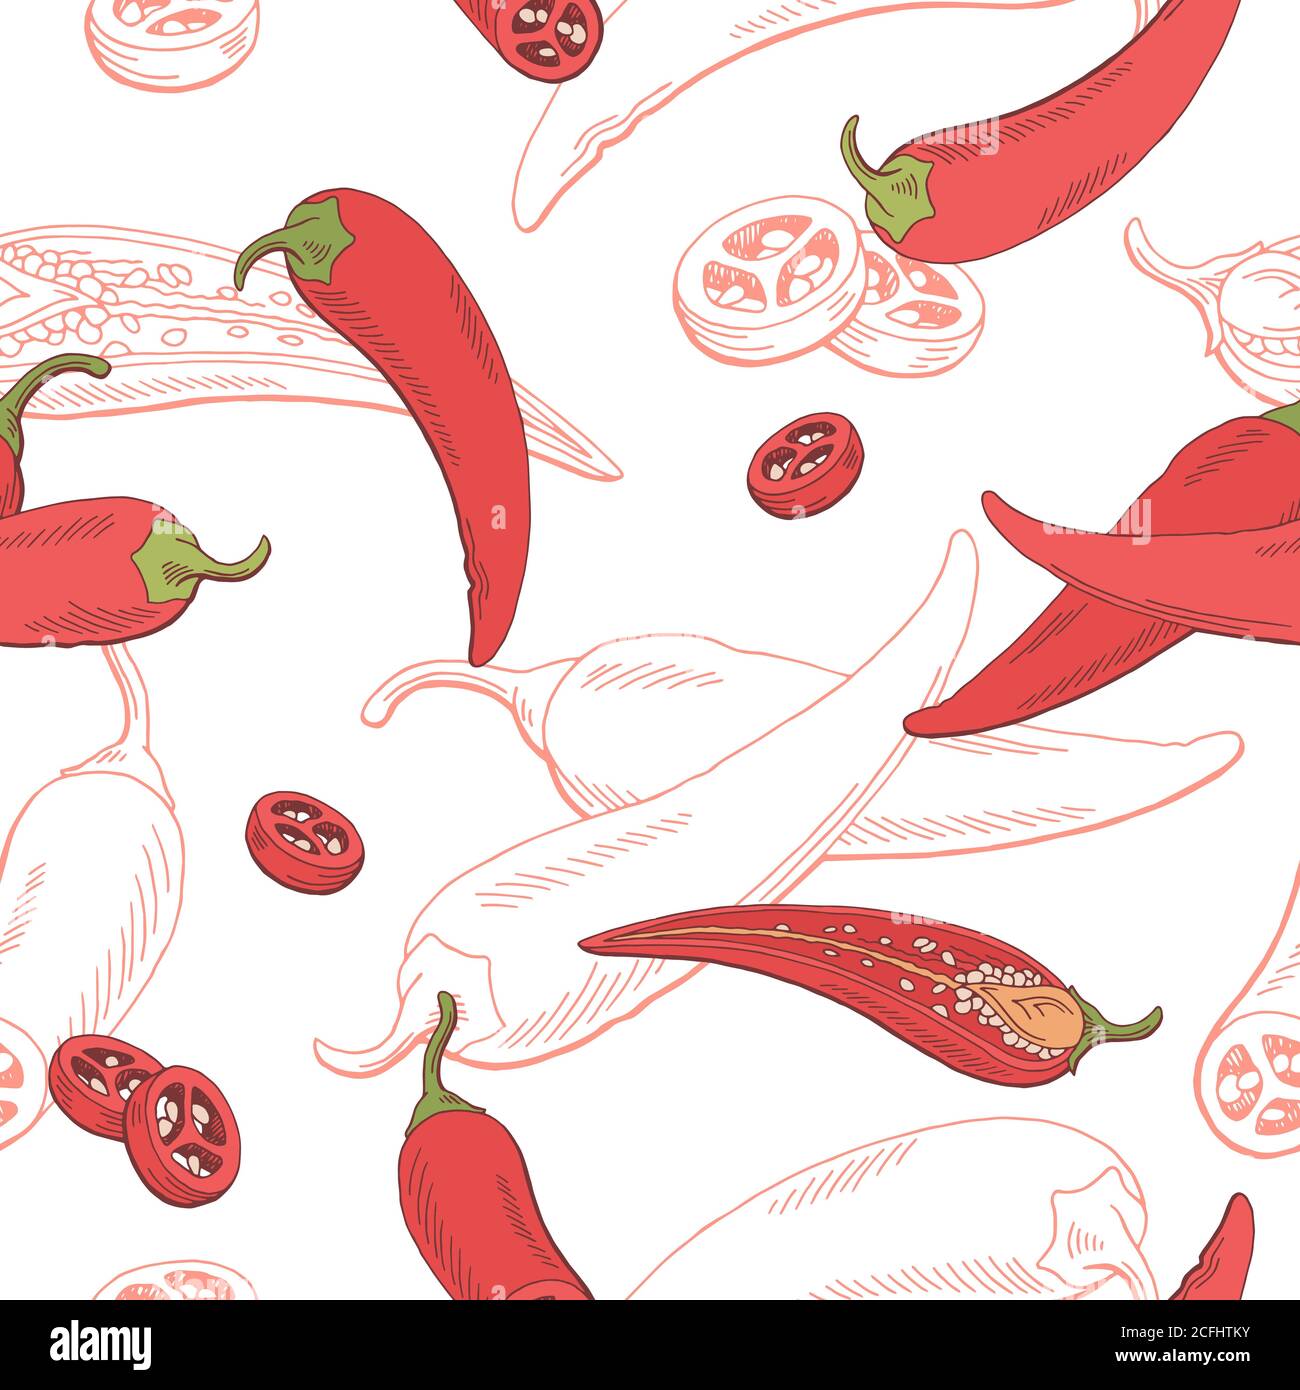 Chilli pepper graphic red color sketch seamless pattern illustration vector Stock Vector